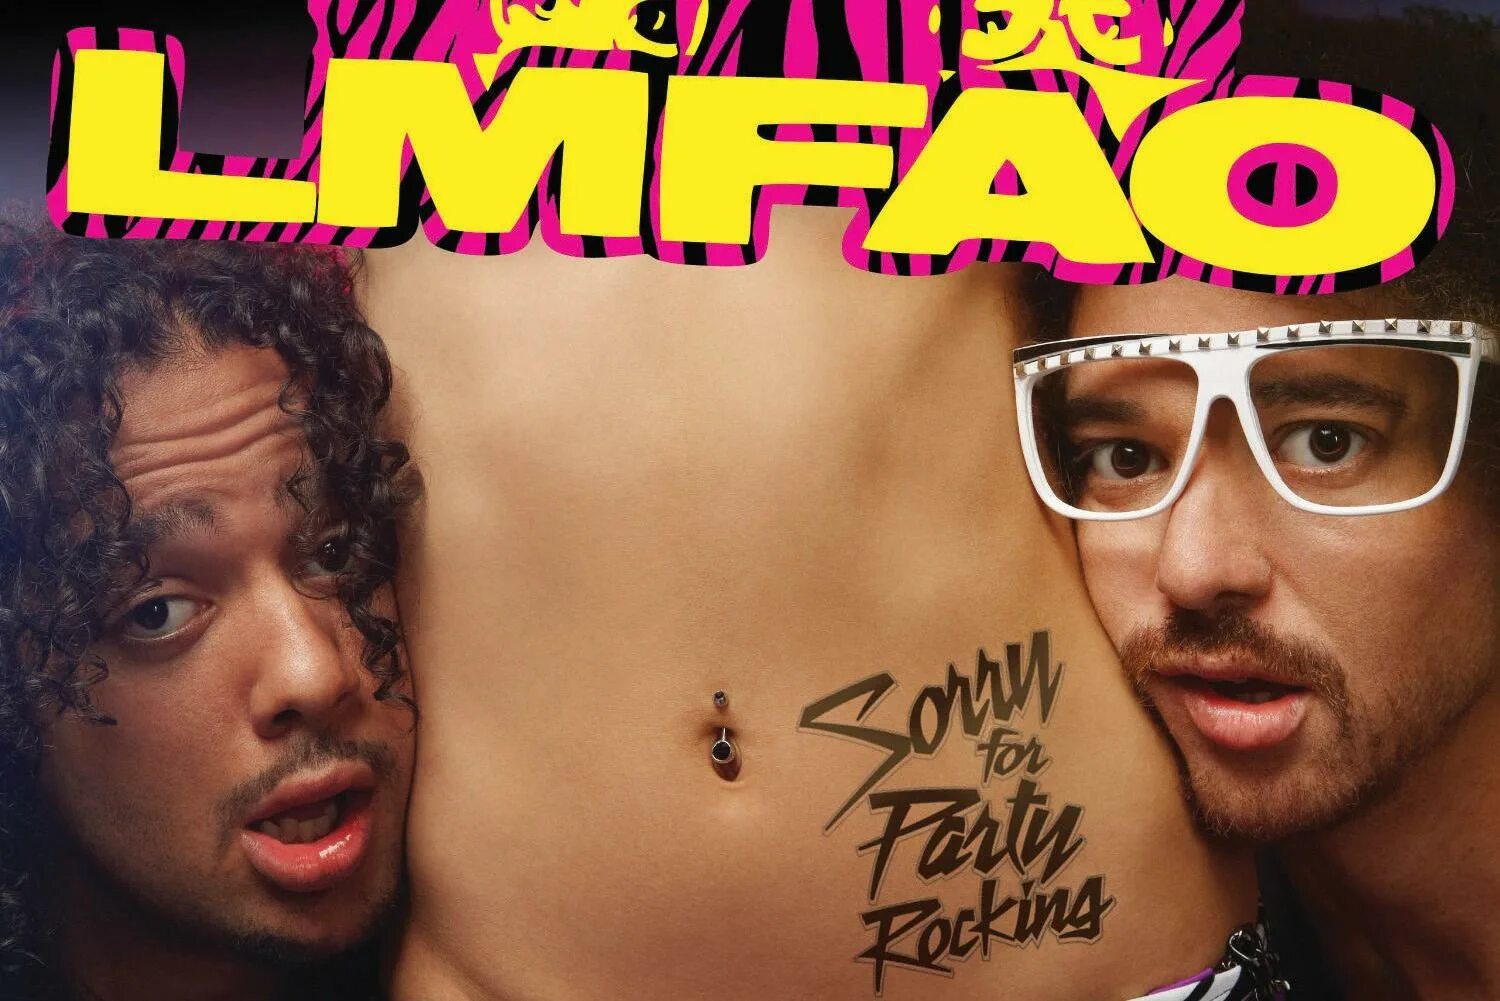 Группа LMFAO. Группа LMFAO 2024. LMFAO sorry for Party Rocking.